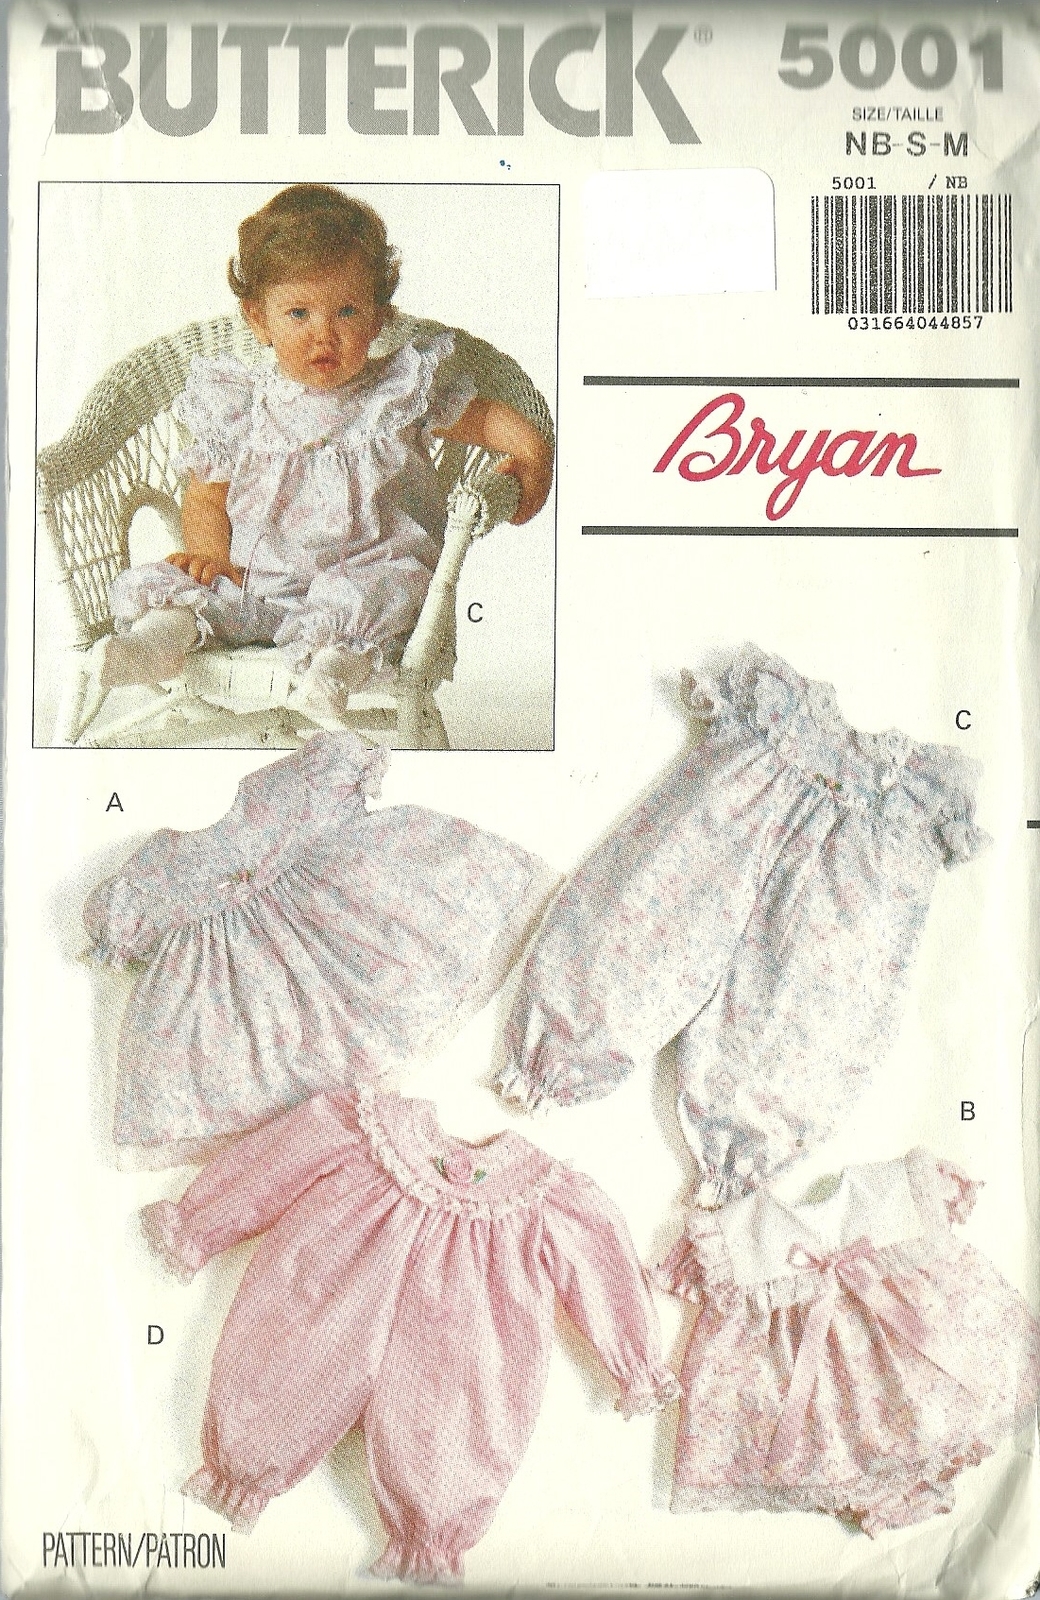 Primary image for Butterick Sewing Pattern 5001 Girls Infant Dress Party Pants Romper NB S M New